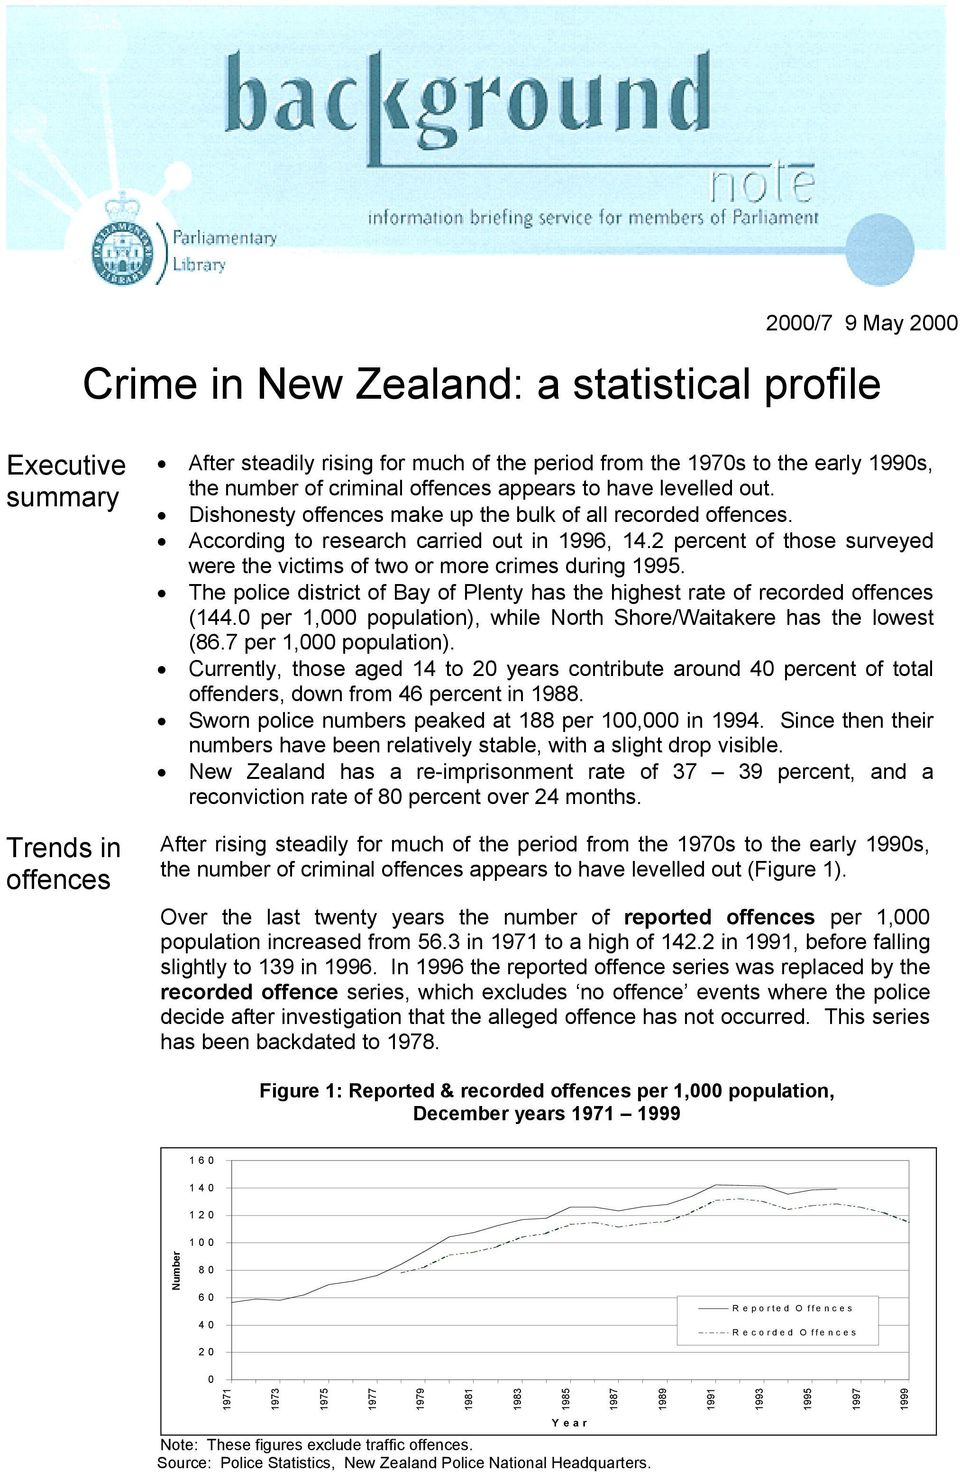 2 percent of those surveyed were the victims of two or more crimes during 1995. The police district of Bay of Plenty has the highest rate of recorded offences (144.